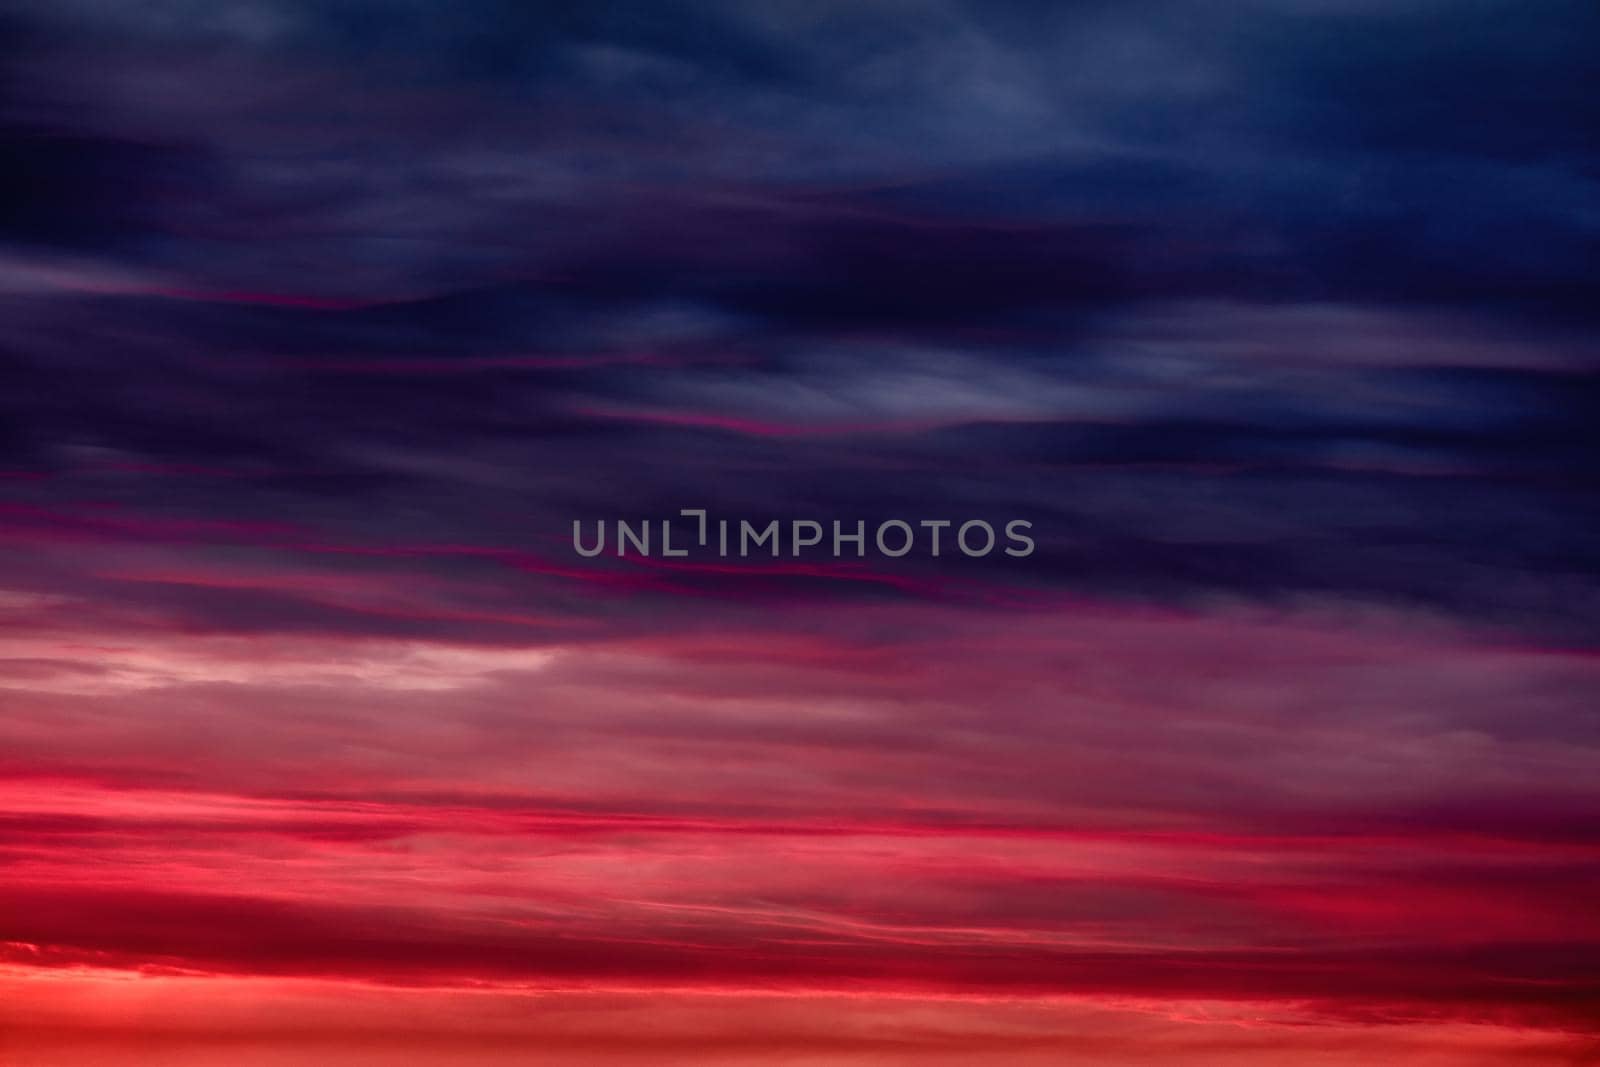 Colorful sunset with clouds in the evening. Abstract nature background. Dramatic and moody pink, purple and blue cloudy sunset sky by EvgeniyQW